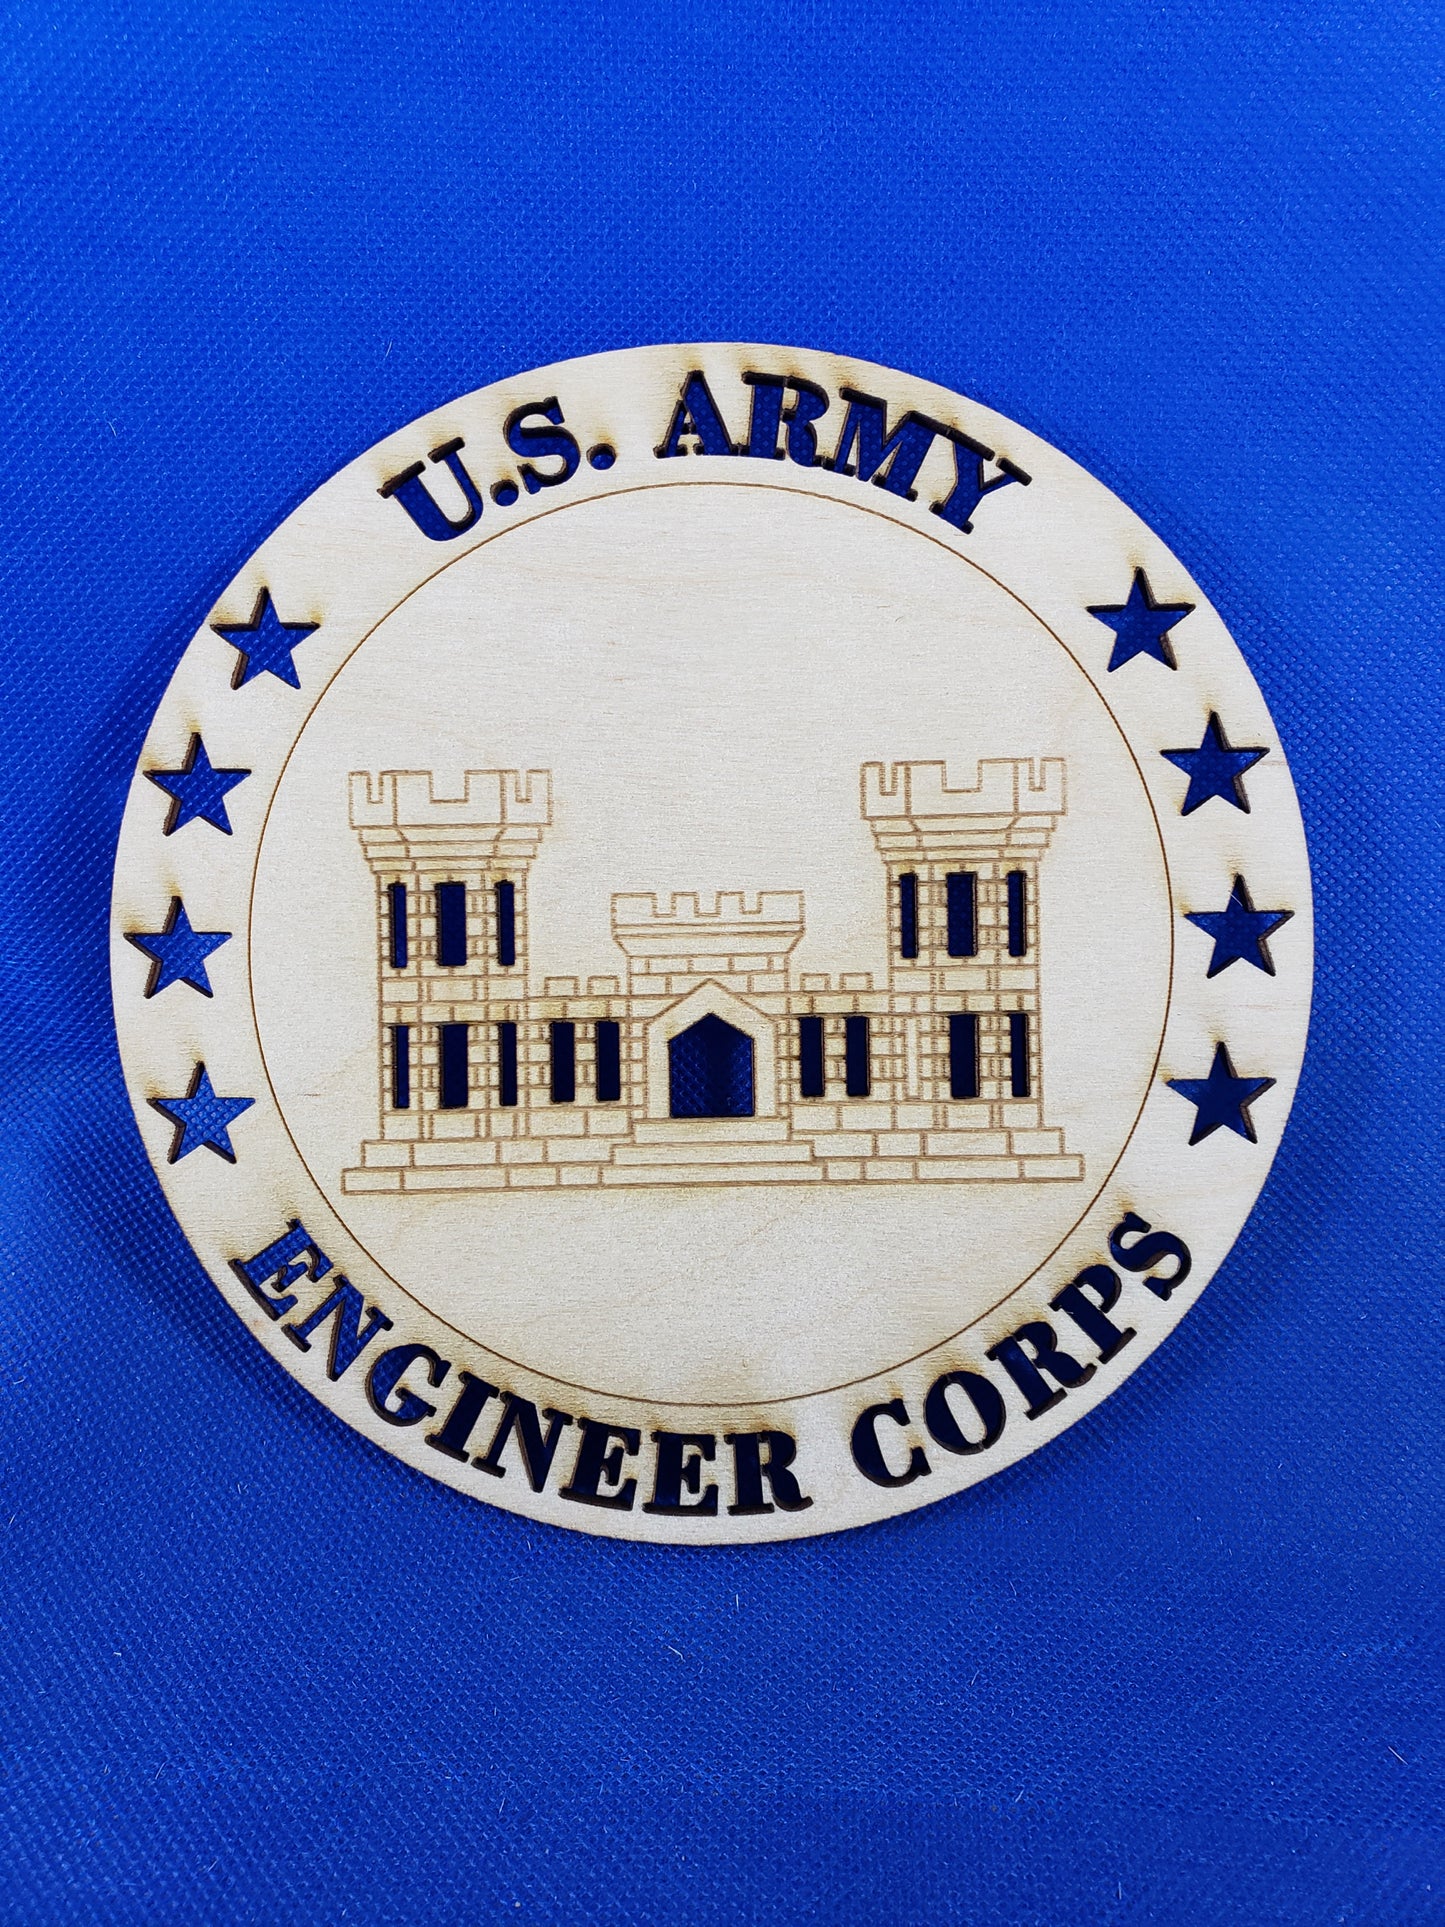 US Army Engineer Corp 1 piece - Laser cut natural wooden blanks